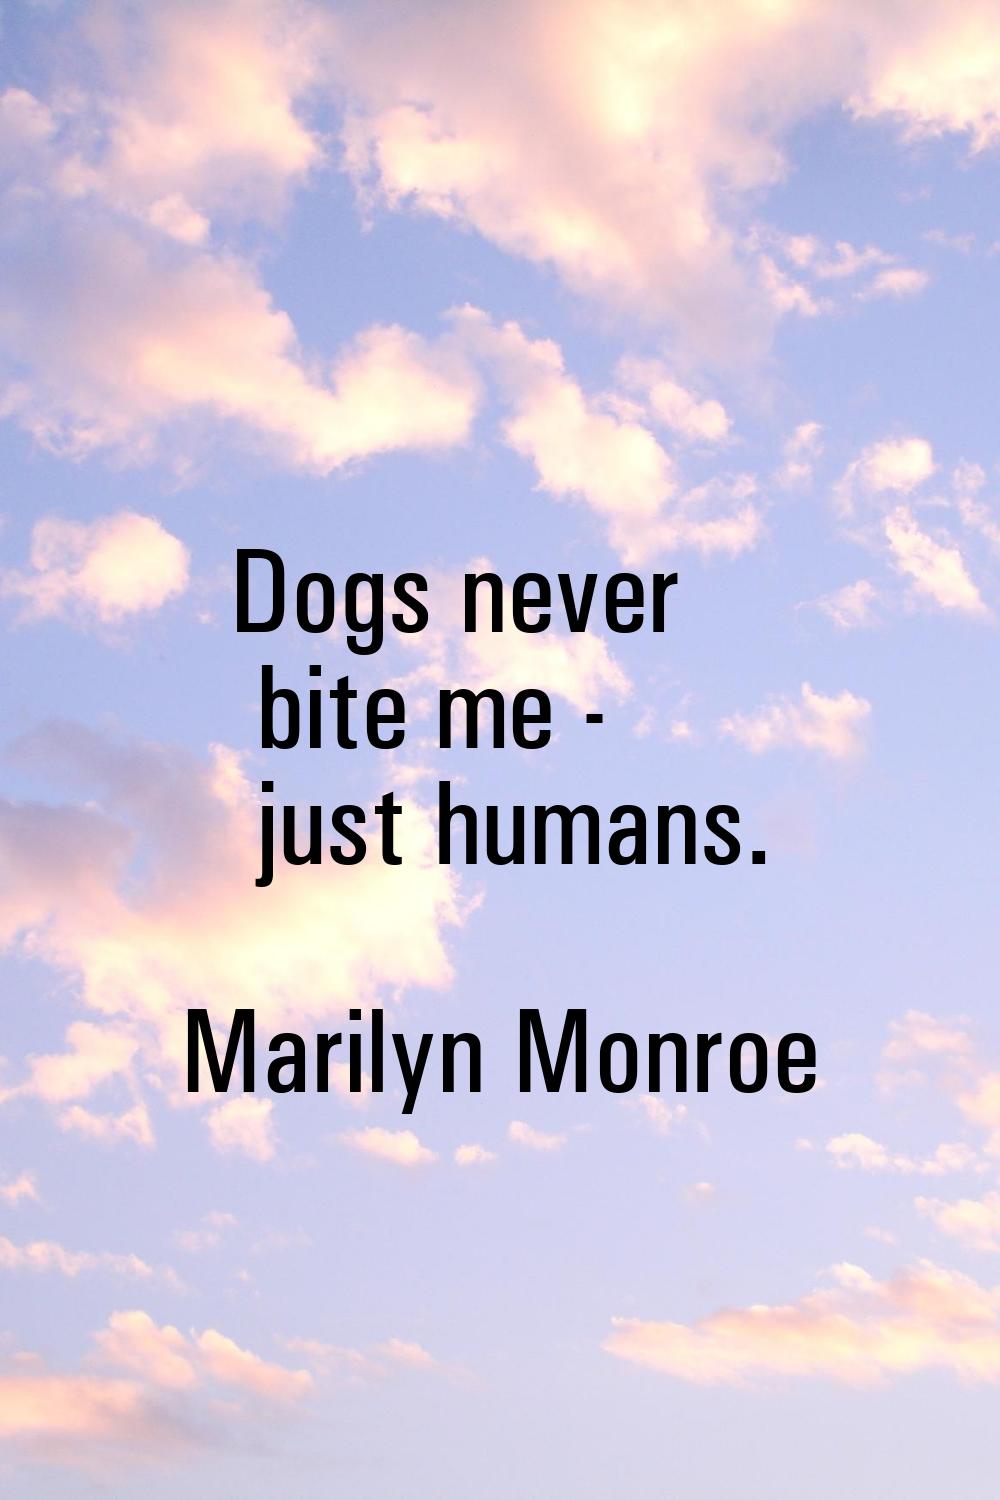 Dogs never bite me - just humans.